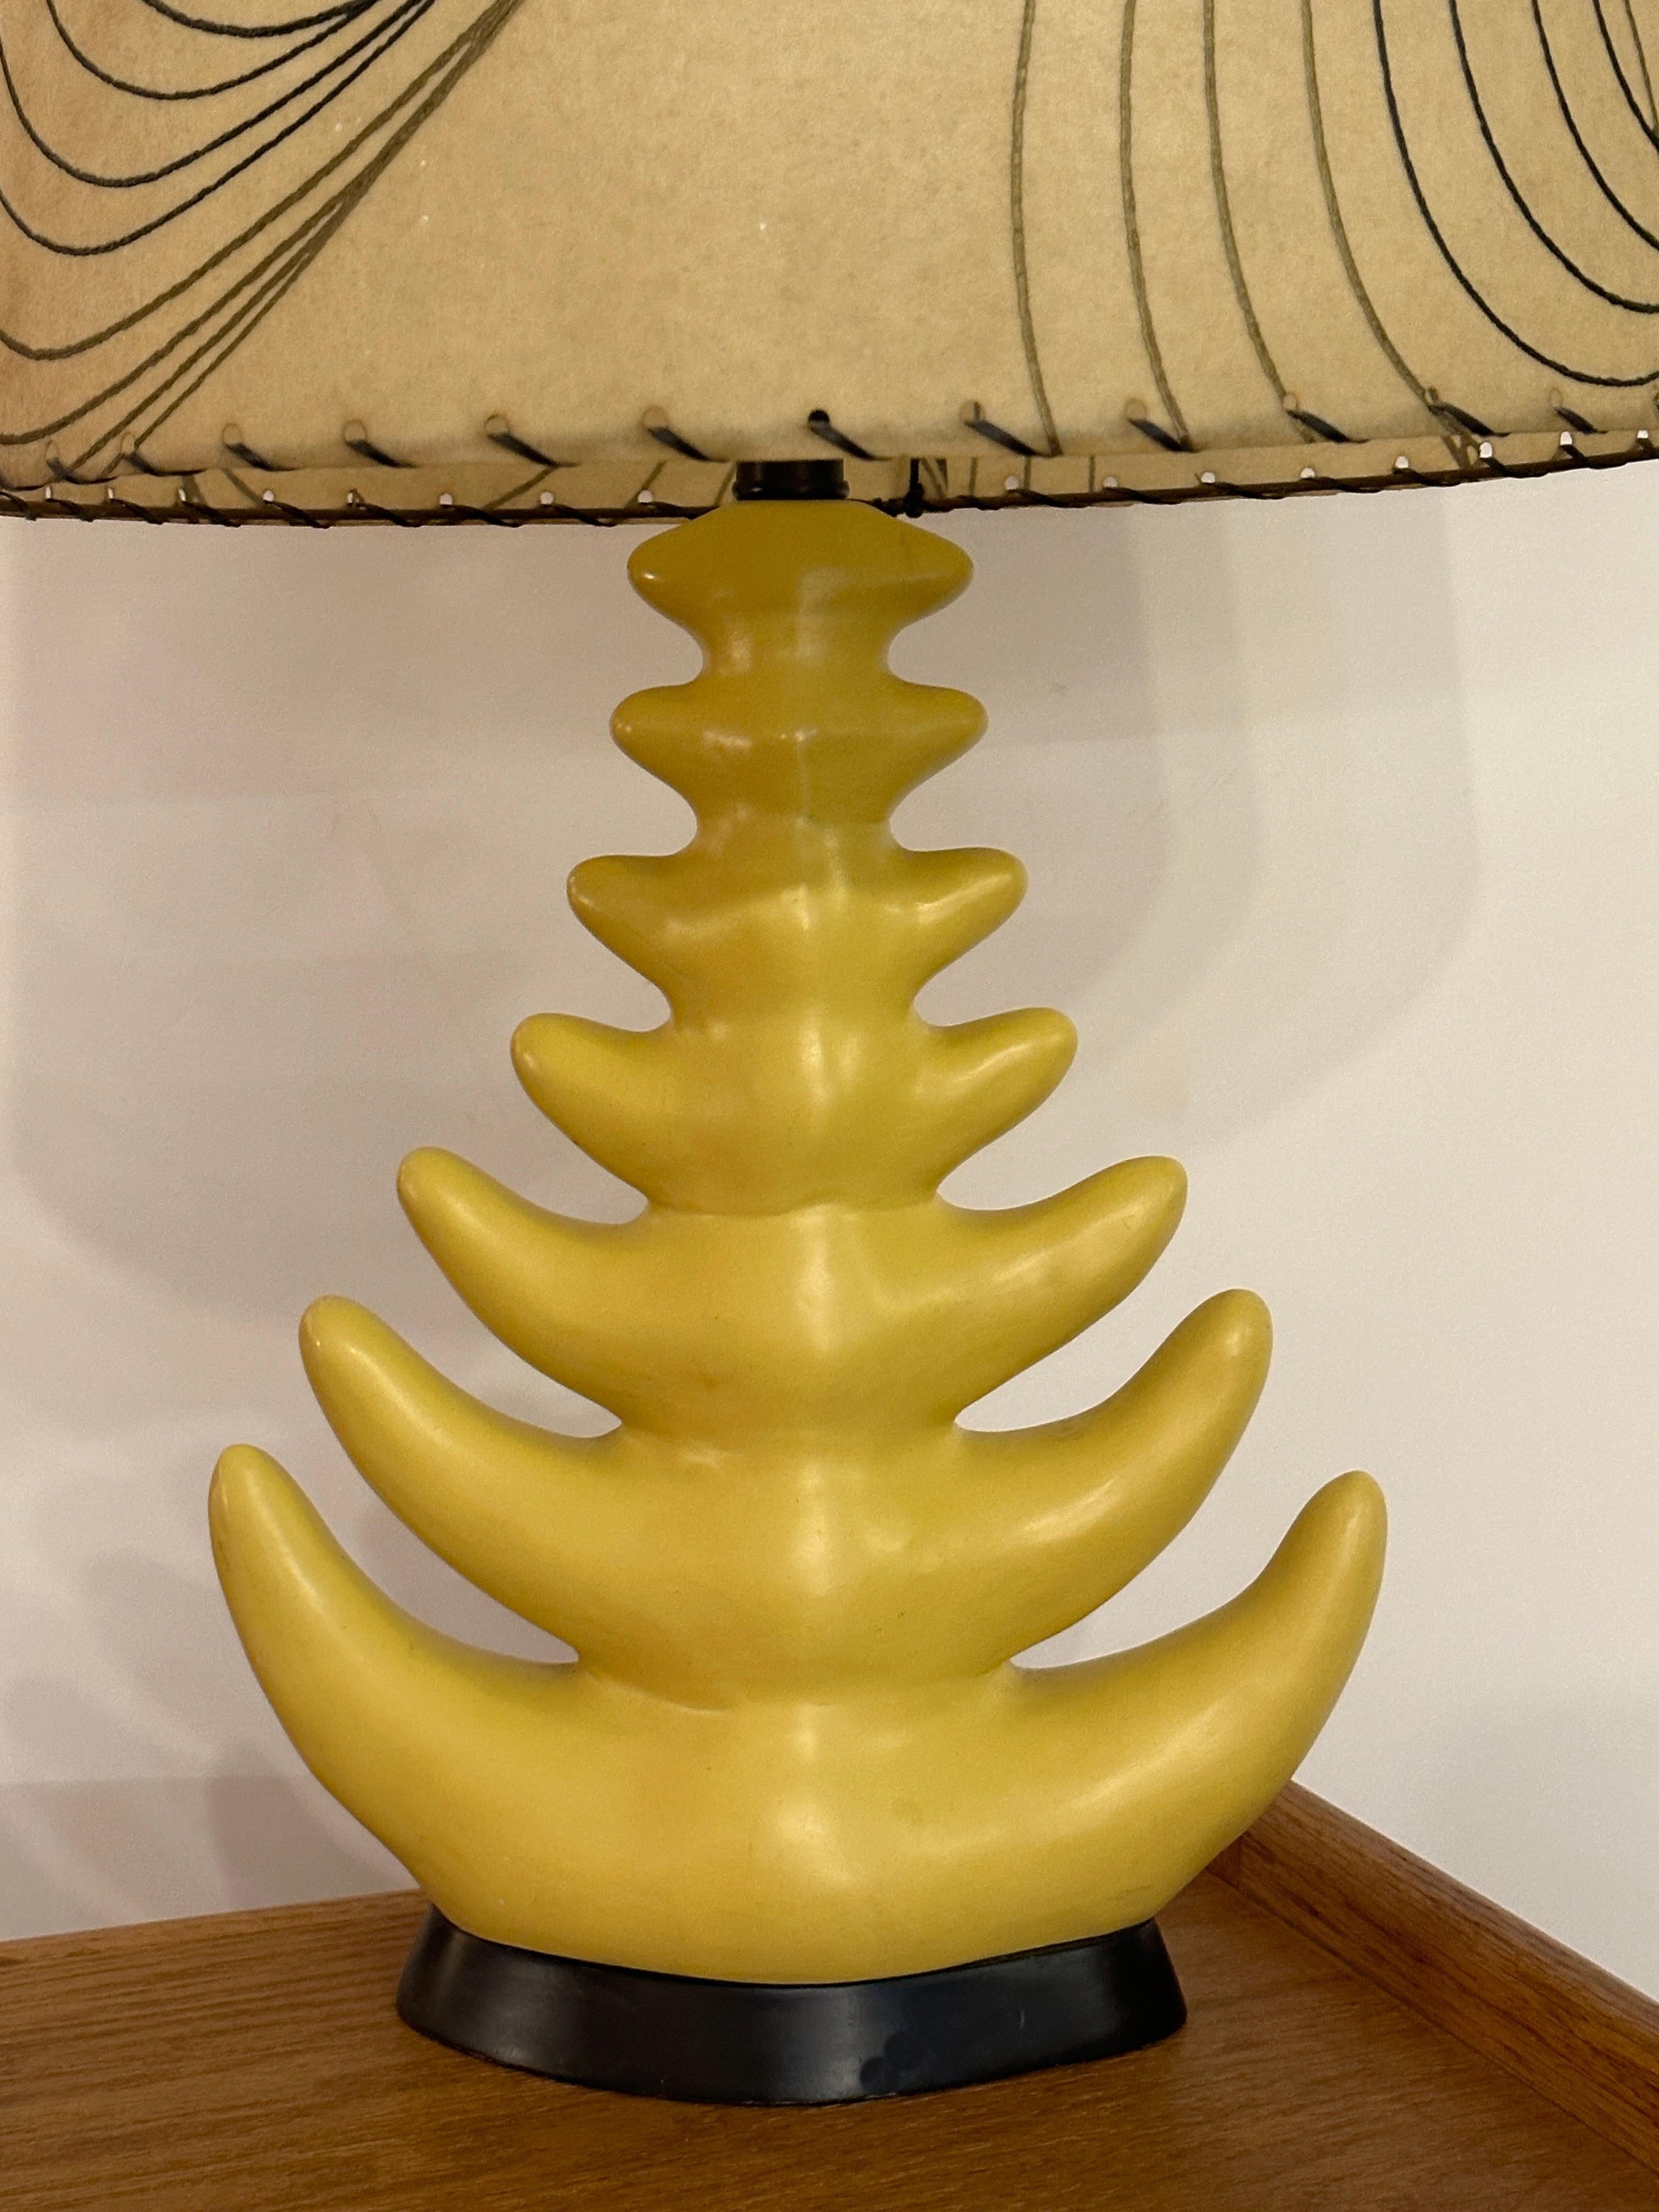 This Mid-Century yellow ceramic lamp with 6 Branches stands on a  black wood base. The six ceramic yellow branches gracefully curve upwards, capturing the essence of mid-century design and adding an elegant touch to its overall form.

The lamp's